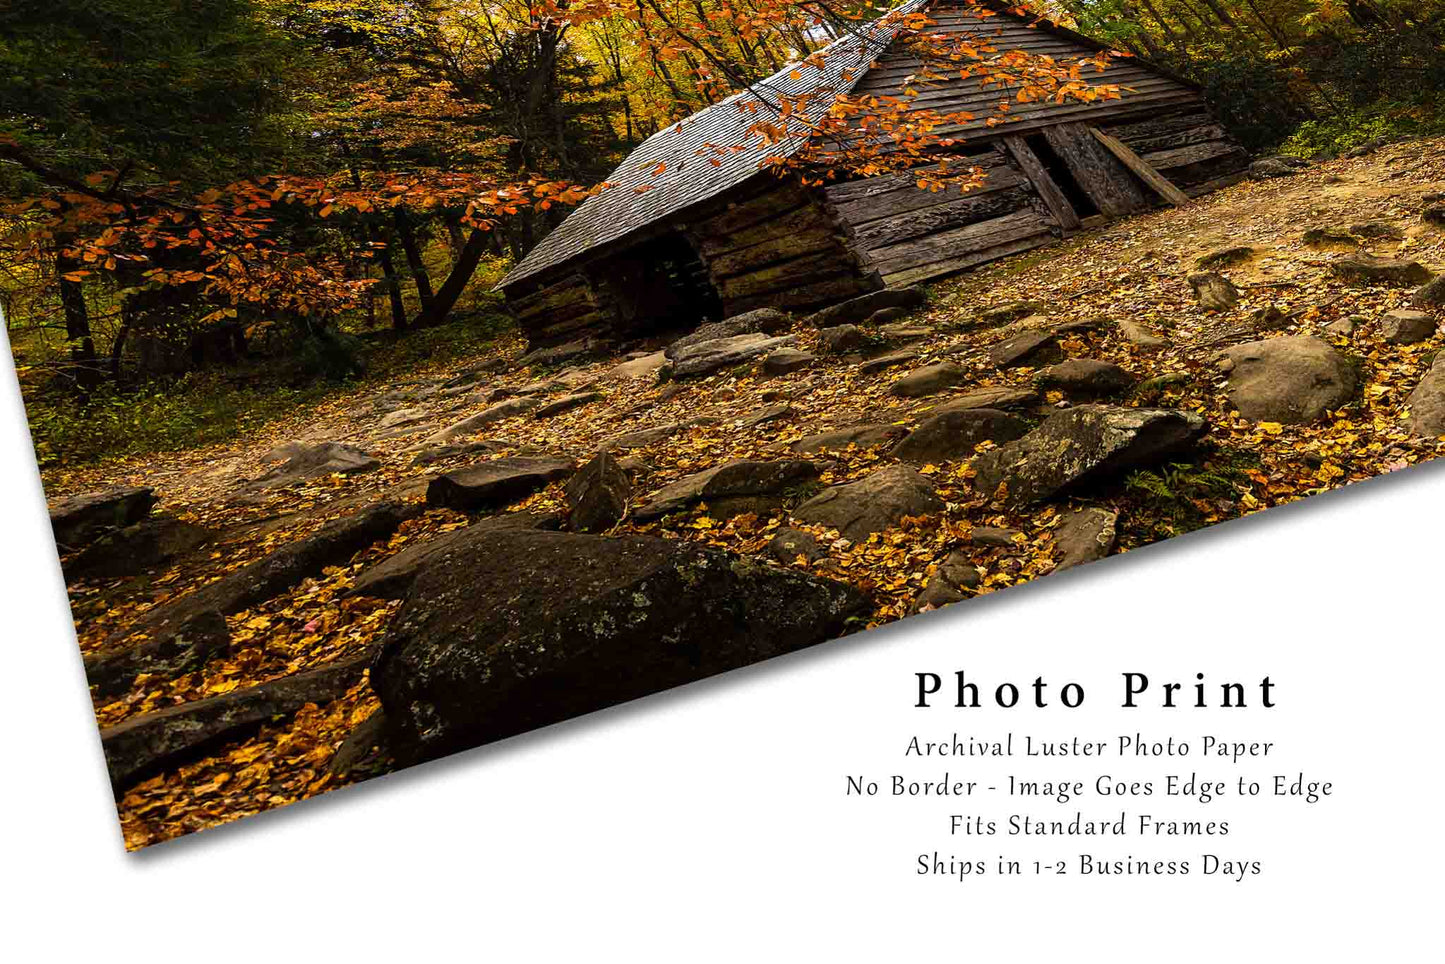 Country Photo Print | Old Barn in Autumn Picture | Gatlinburg Tennessee Wall Art | Great Smoky Mountains Photography | Rustic Farmhouse Decor